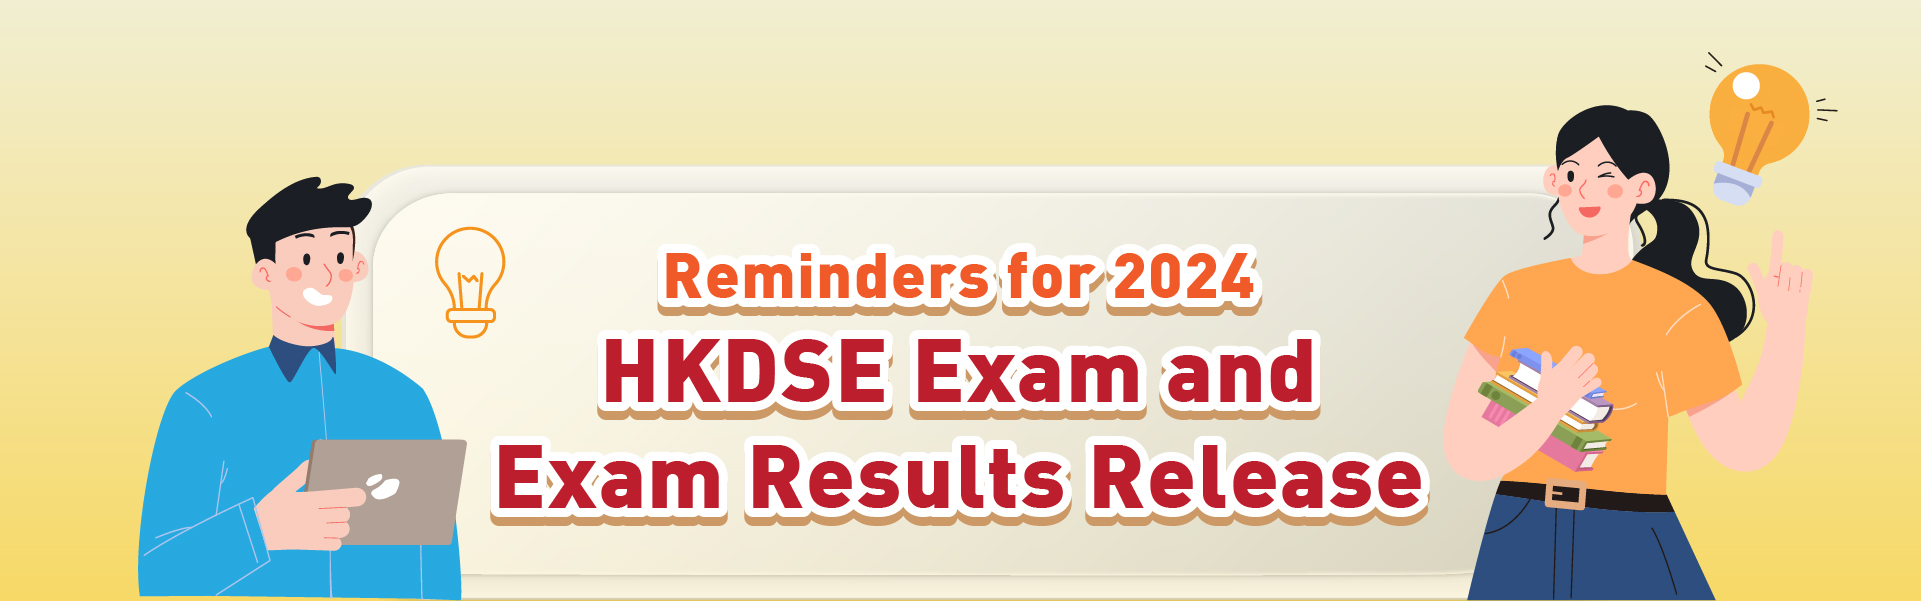 Reminders for 2024 HKDSE Exam and Exam Results Release